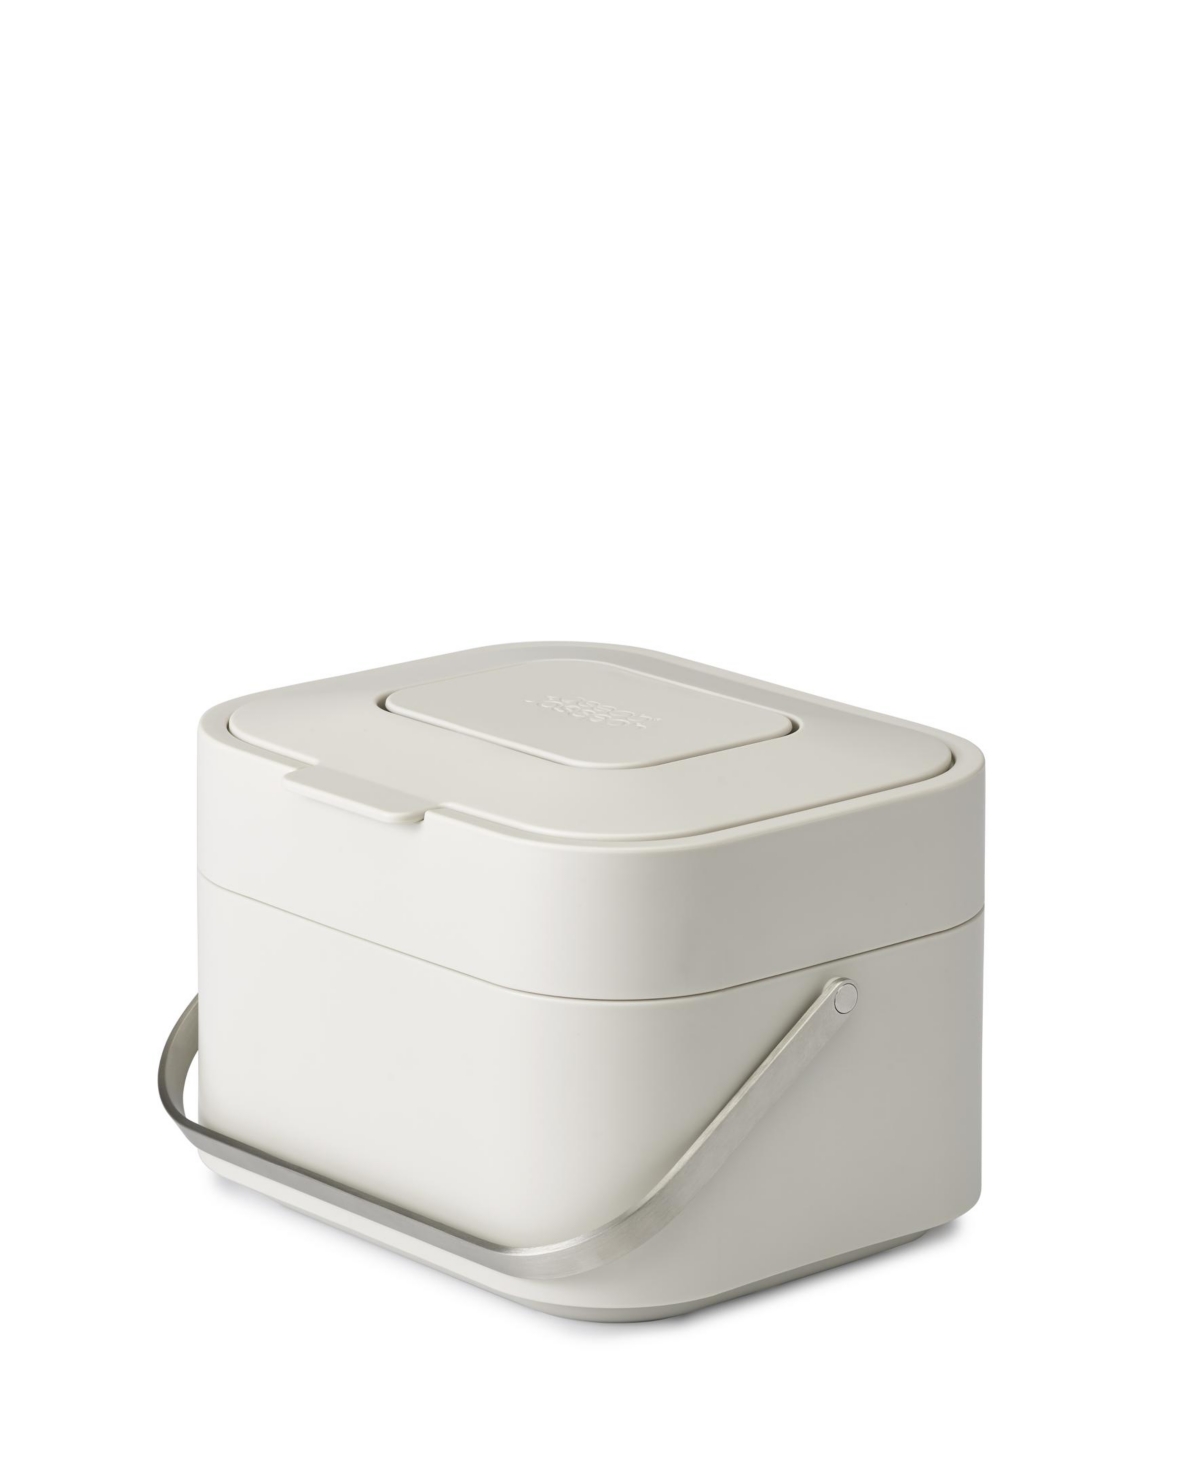 Joseph Joseph Stack 4 Food Waste Caddy With Odor Filter In Stone